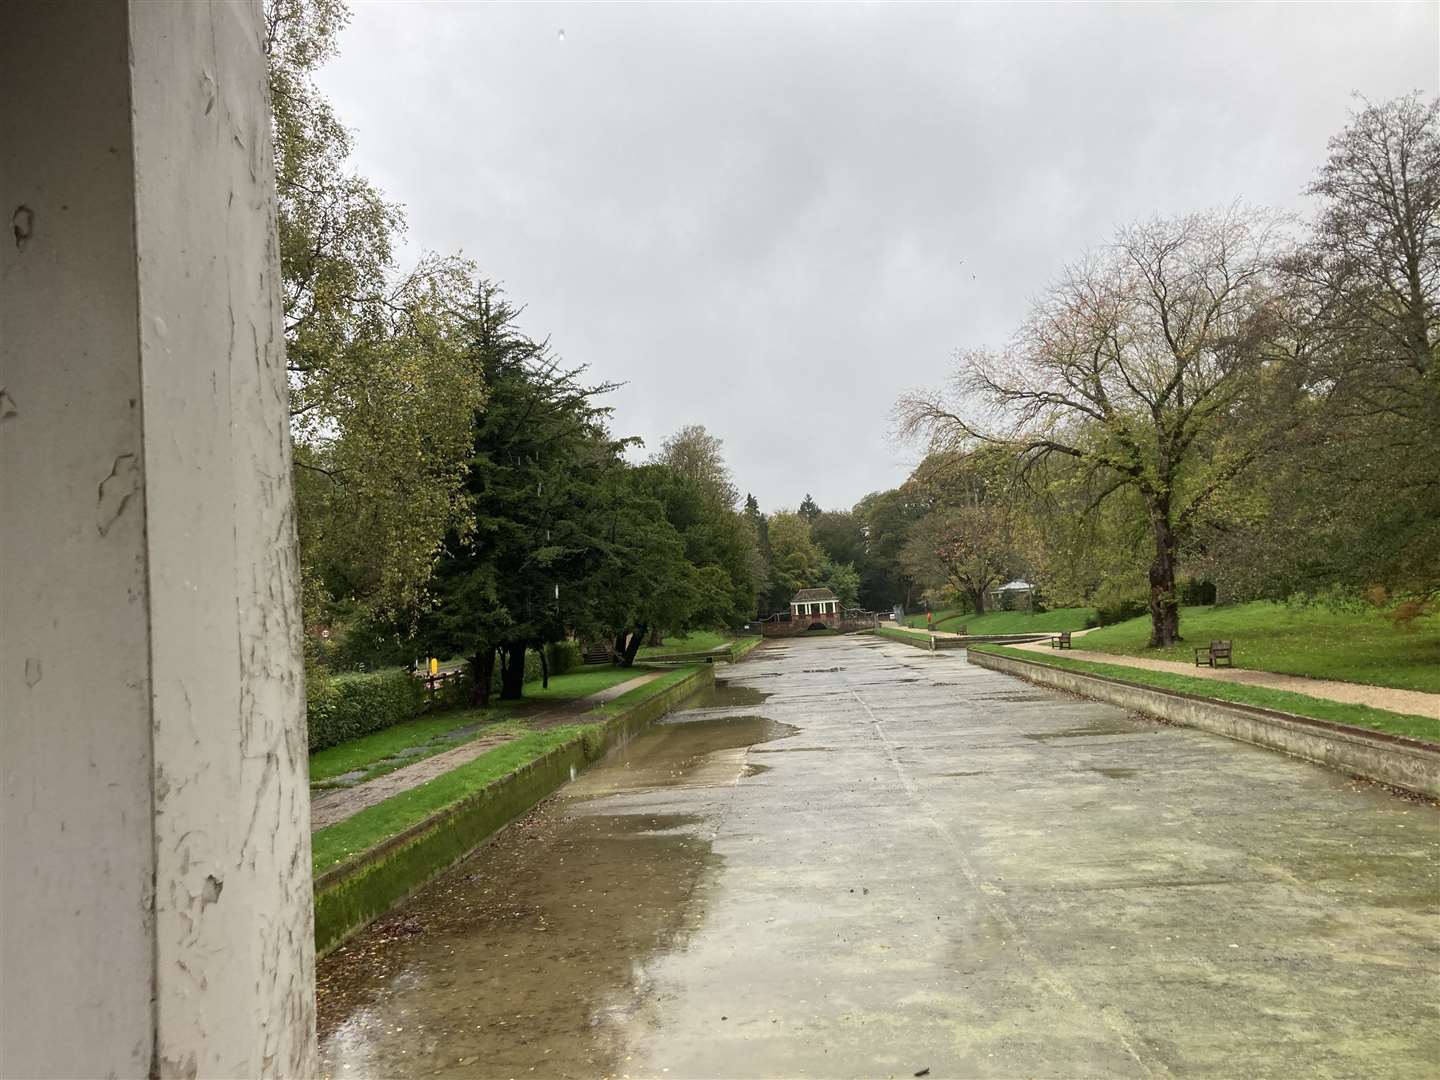 The pond in Russell Gardens, Dover, is currently empty